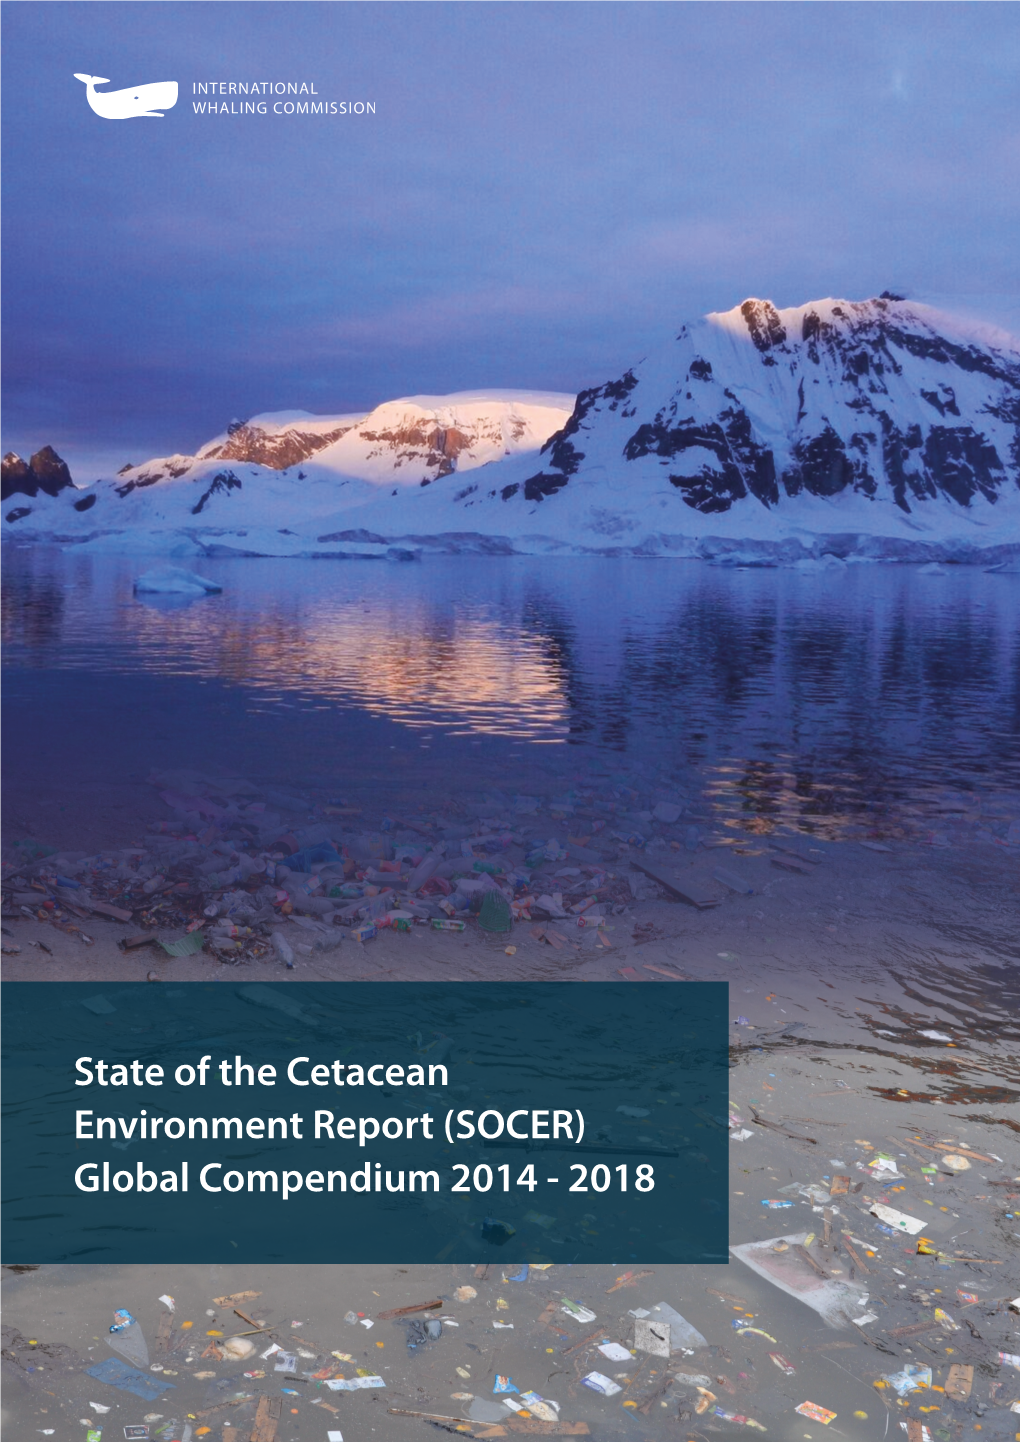 State of the Cetacean Environment Report (SOCER) Global Compendium 2014 - 2018 Produced by the IWC Secretariat